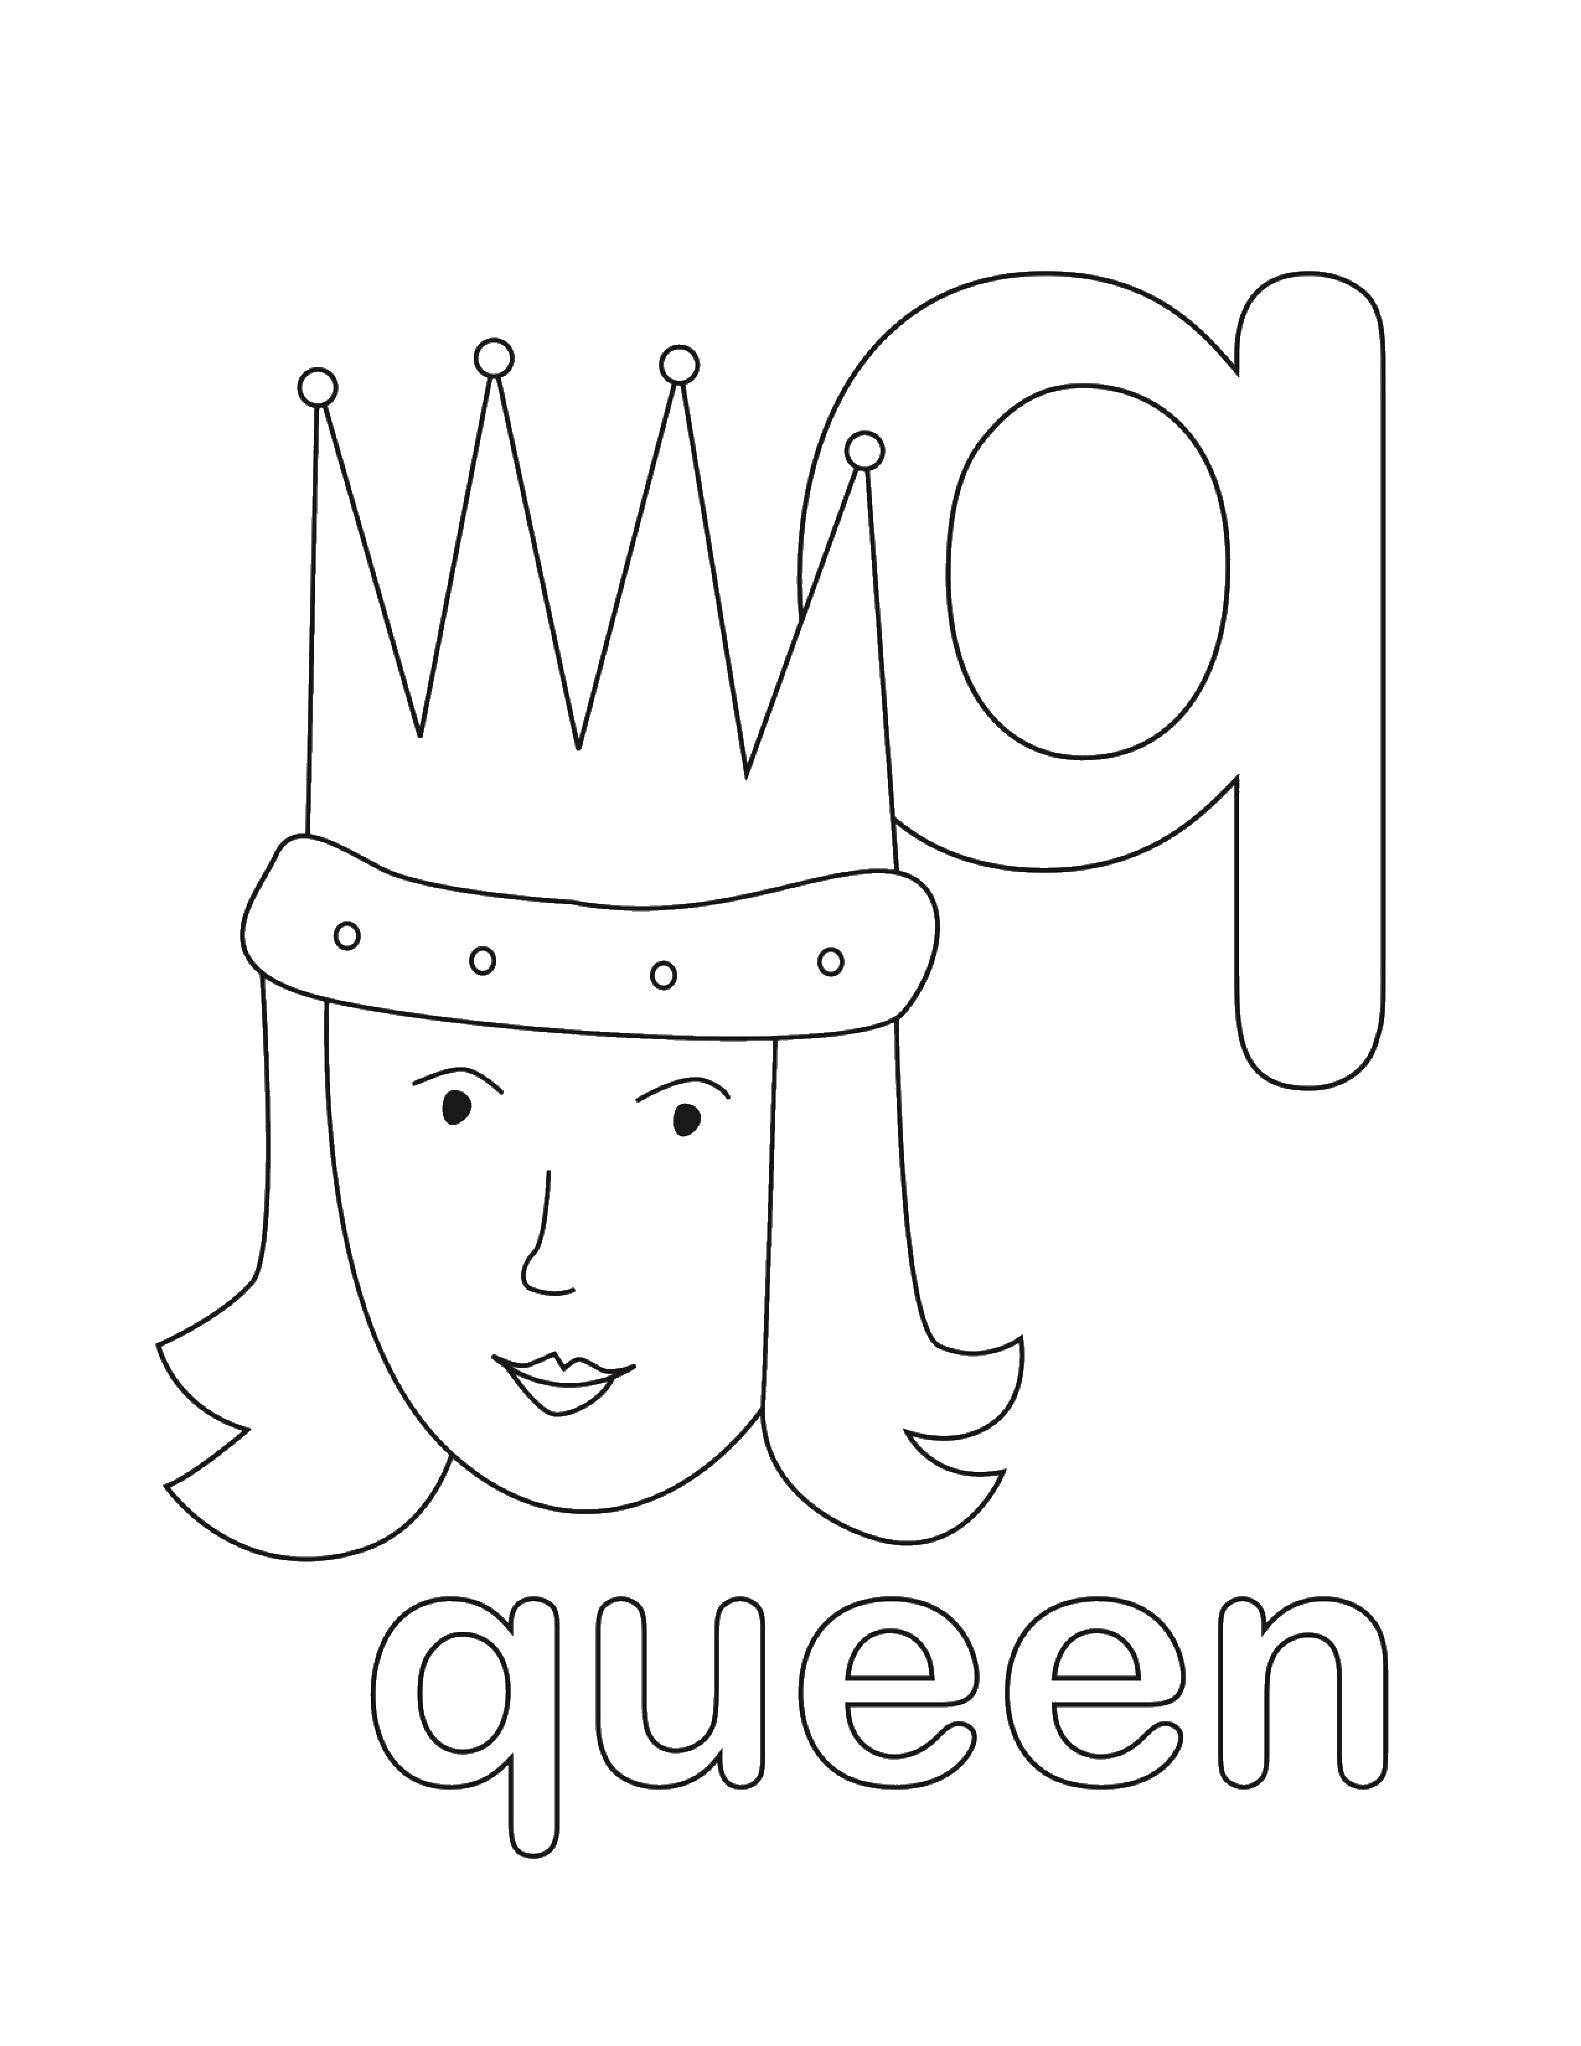 Coloring The Queen. Category English words. Tags:  English.